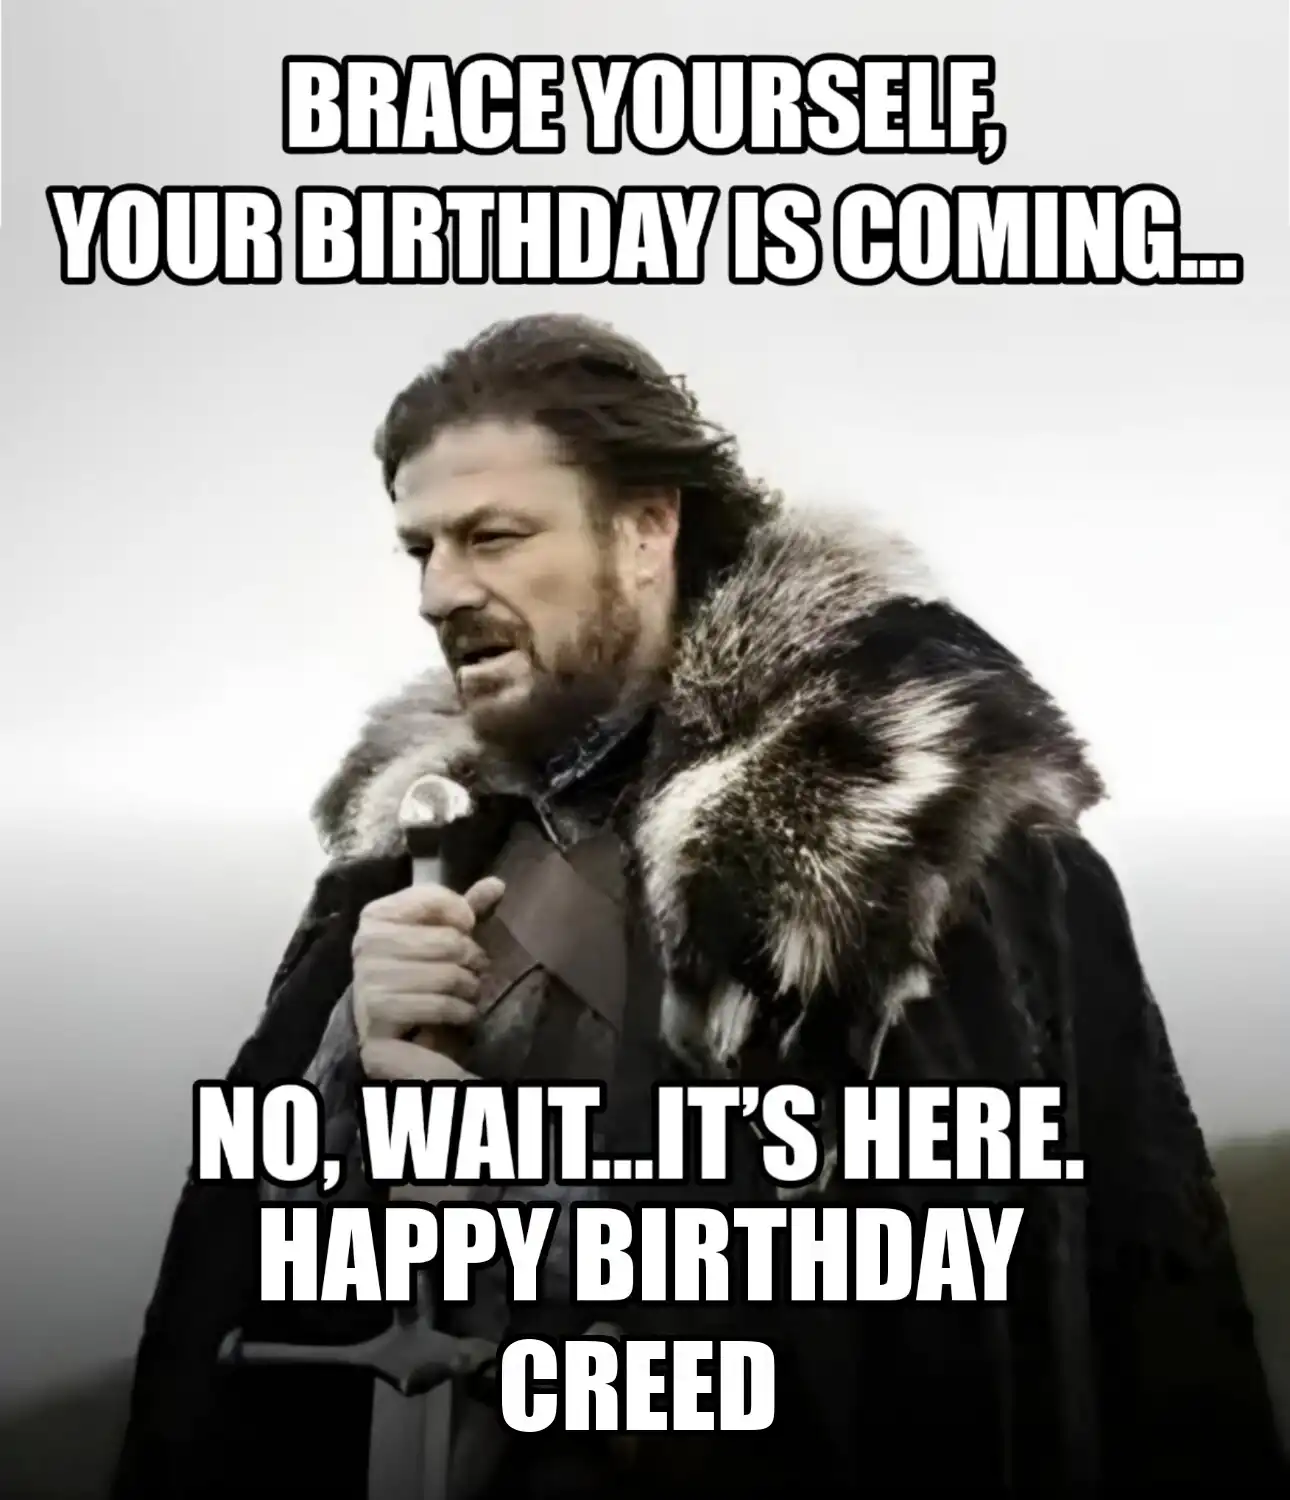 Happy Birthday Creed Brace Yourself Your Birthday Is Coming Meme